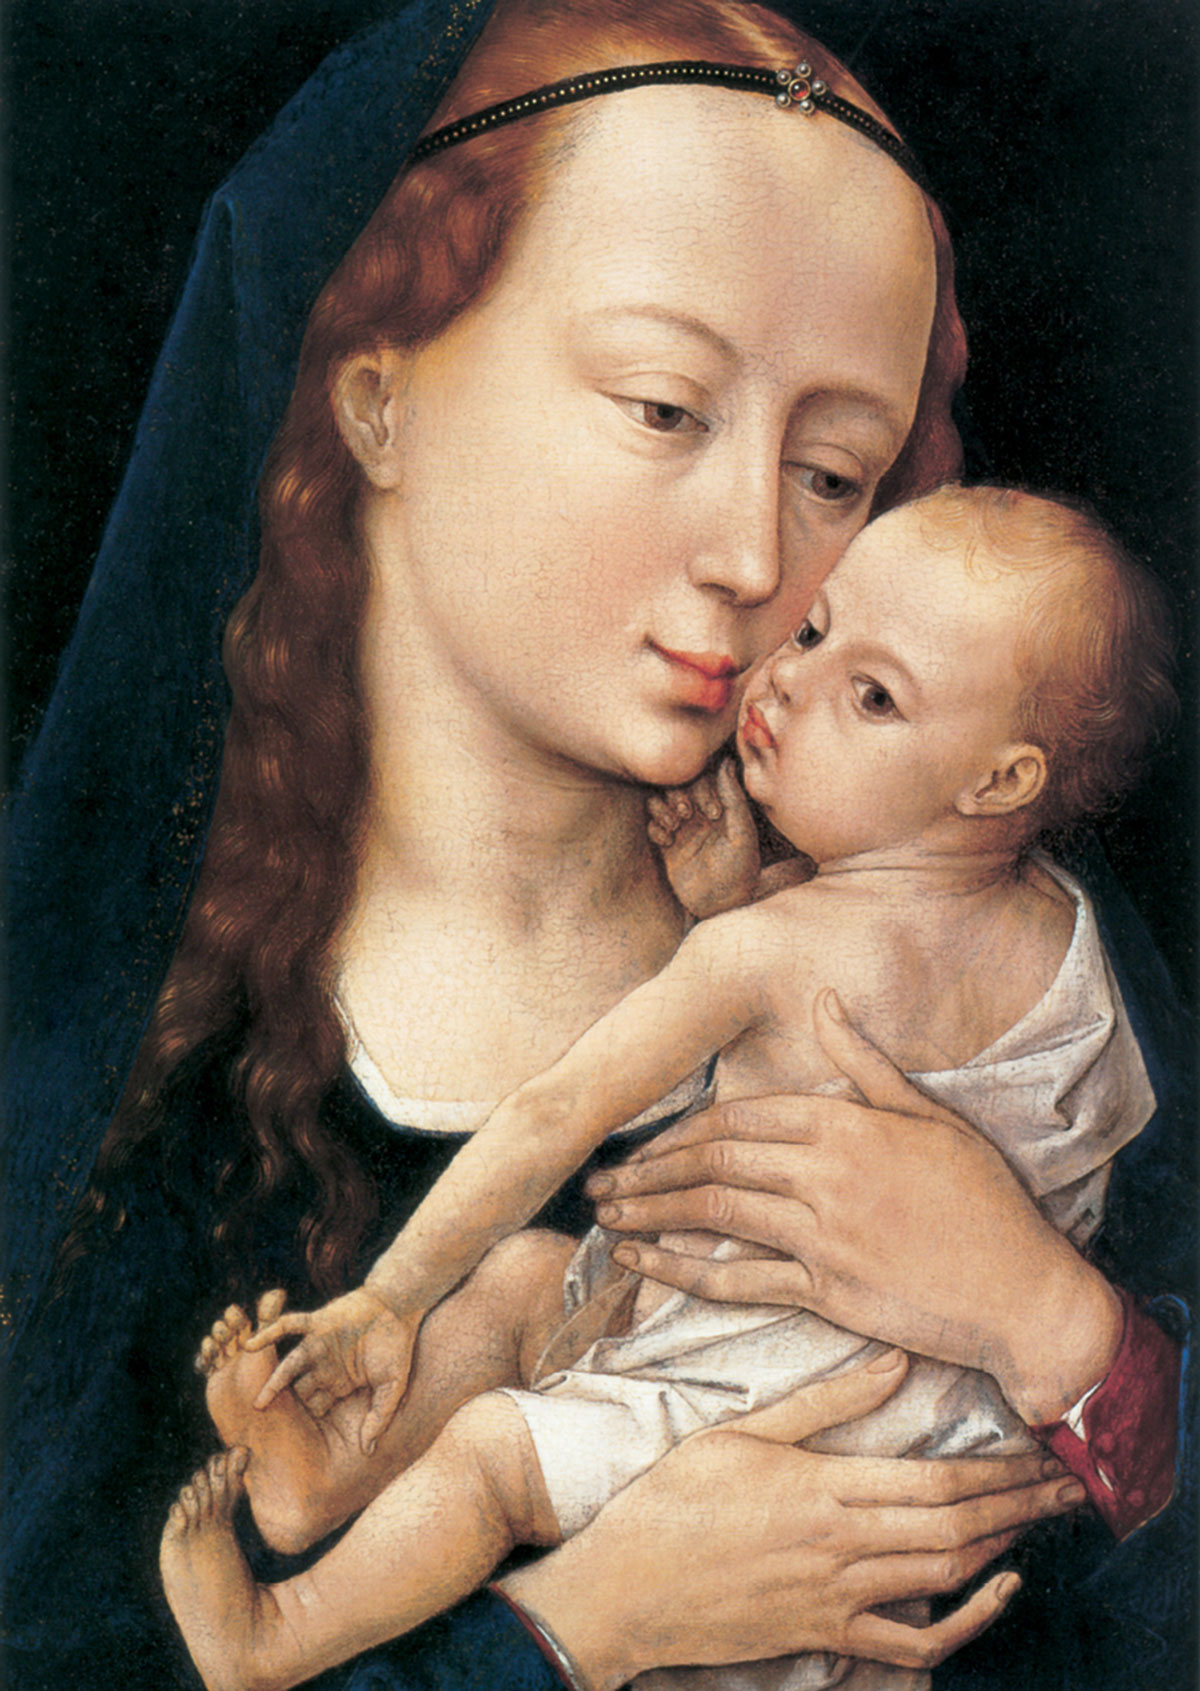 Virgin and Child by Rogier Van der Weyden, ca. 1455–1460. Thought to be another copy of the Cambrai Madonna.